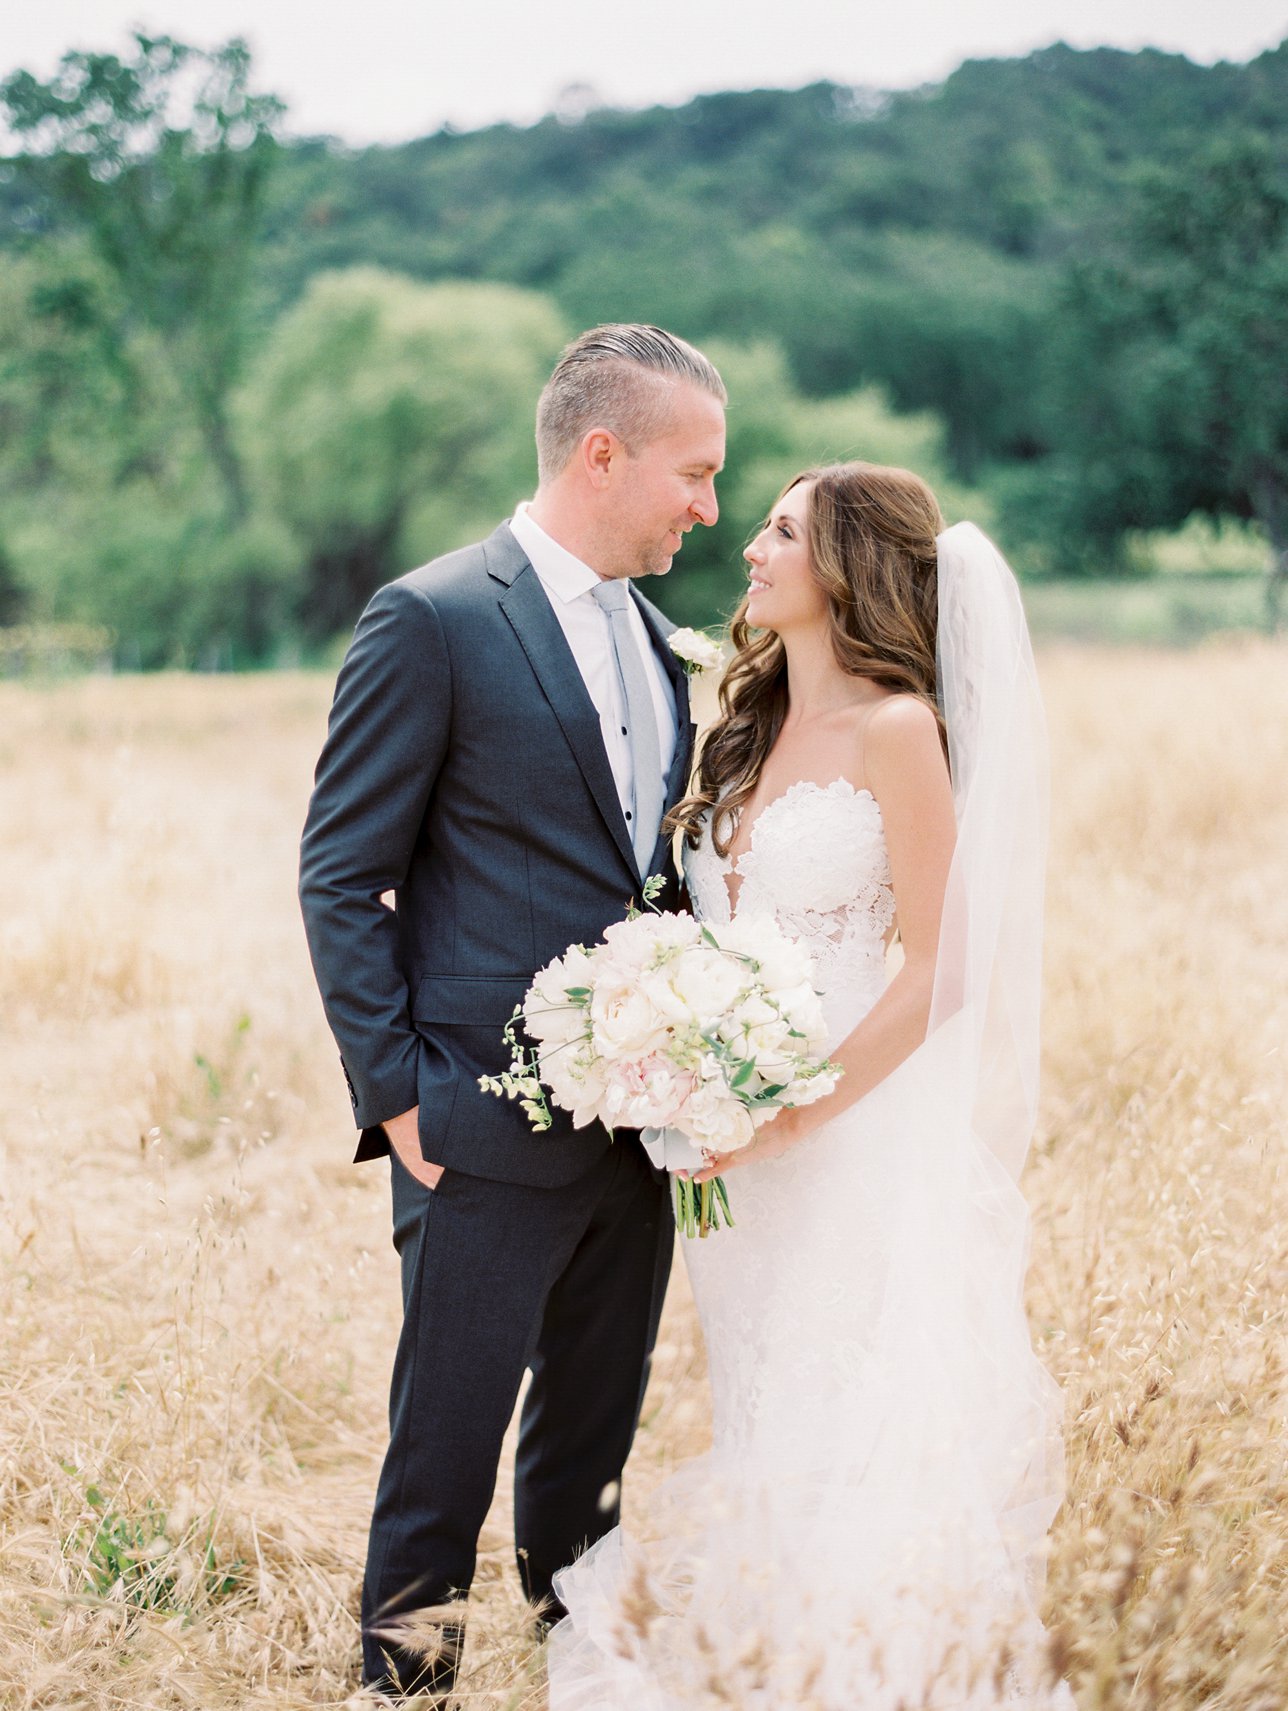 HammerSky Vineyards wedding photos - Paso Robles Wedding Photographer | Rachel Solomon Photography_9021